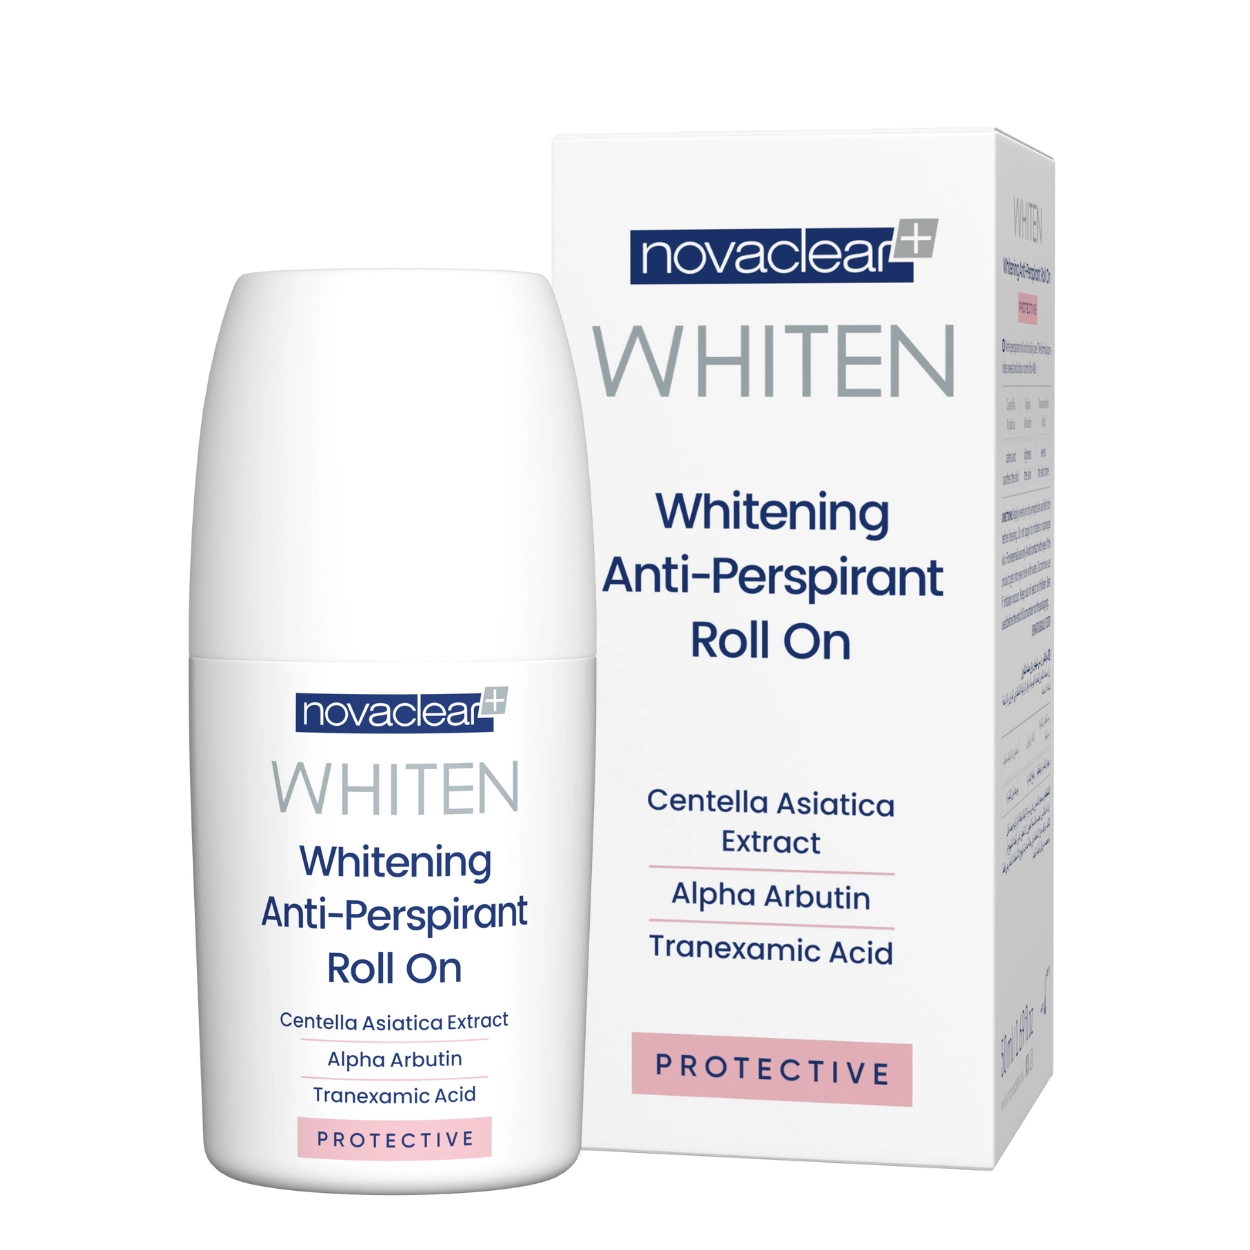 novaclear-whiten-whitening-anti-perspirant-roll-on-protective